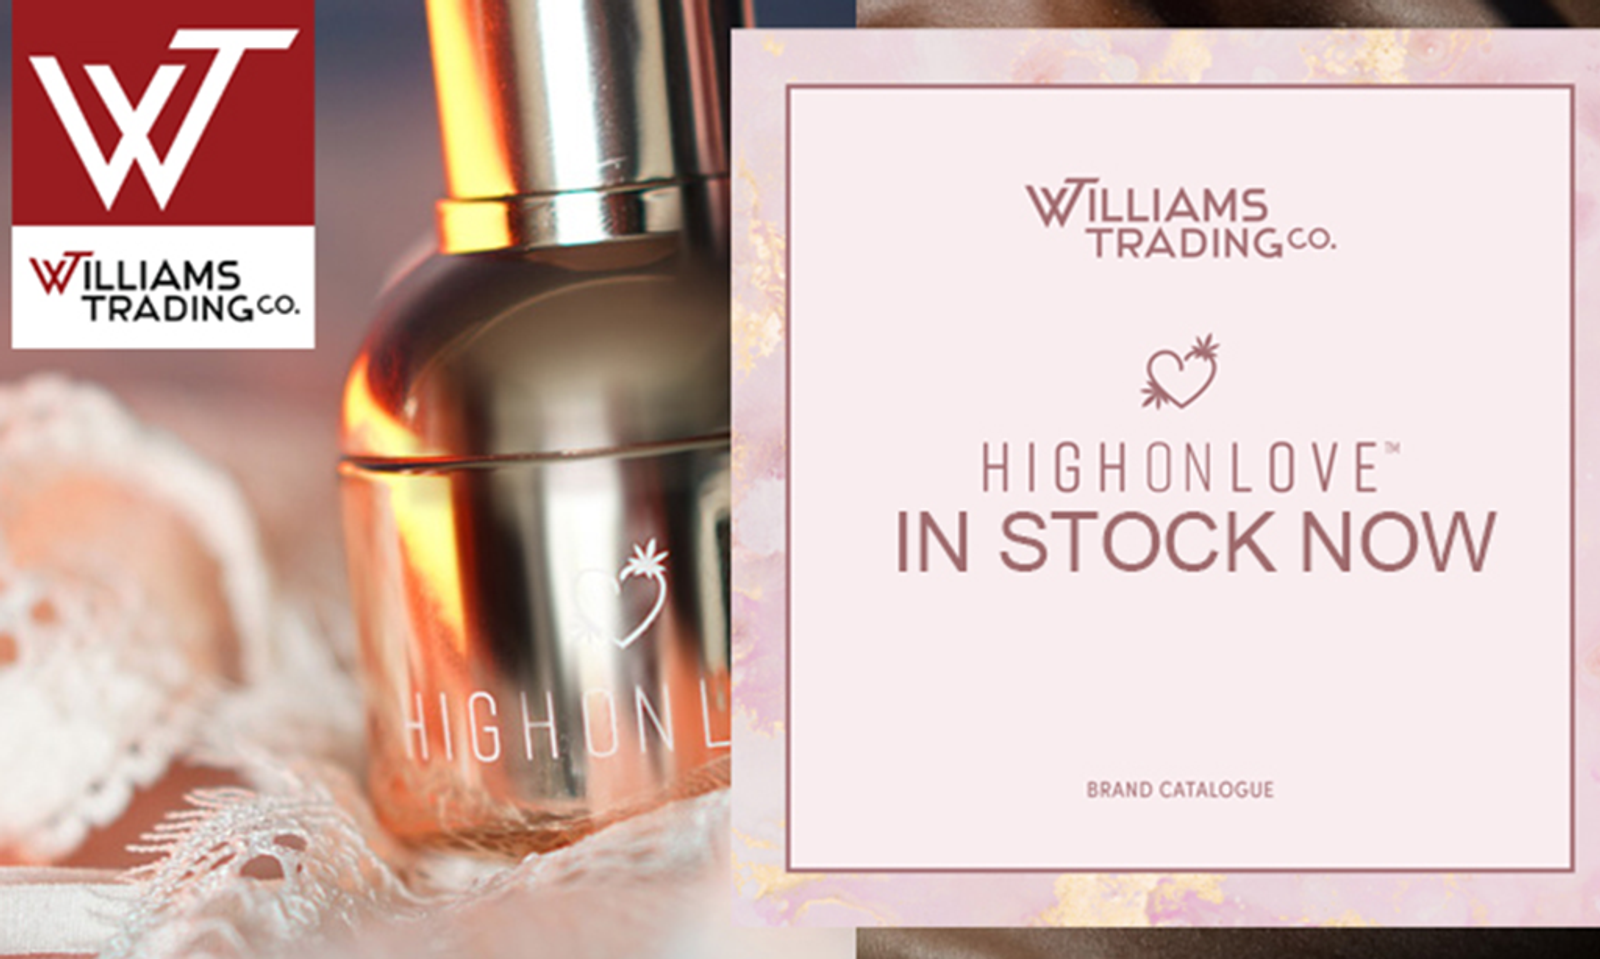 Williams Trading Co Launches 'High On Love' CBD Cosmetics Line